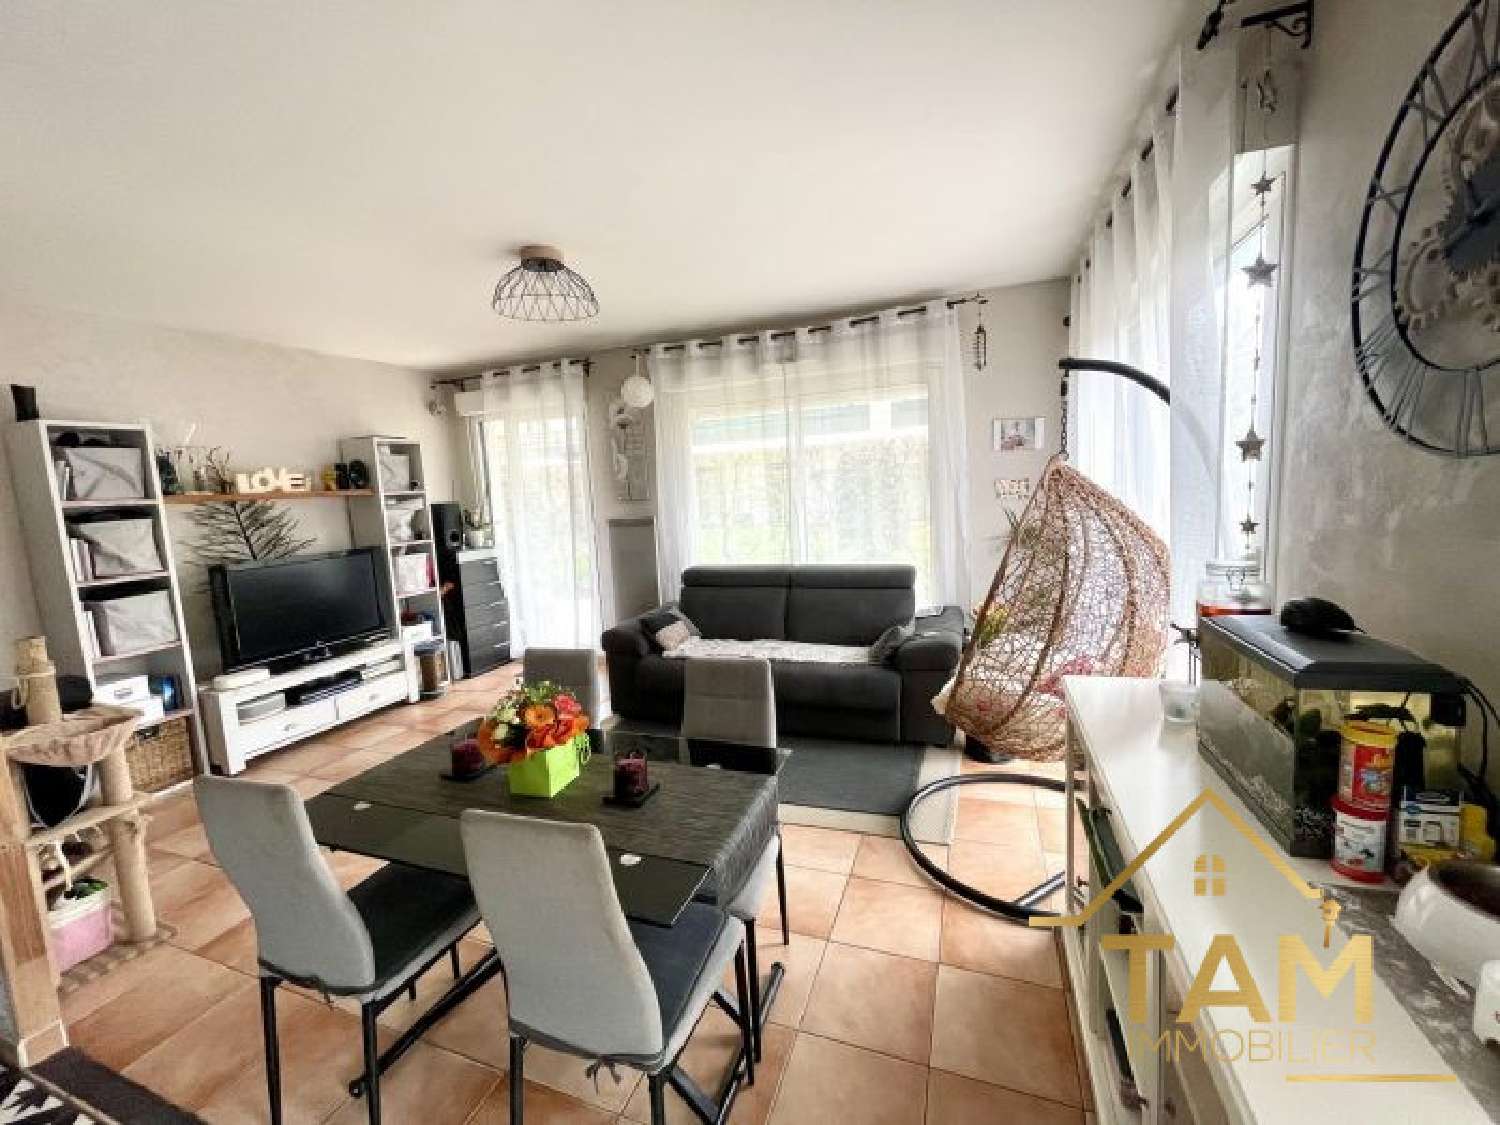  for sale apartment Bois-d'Arcy Yvelines 1